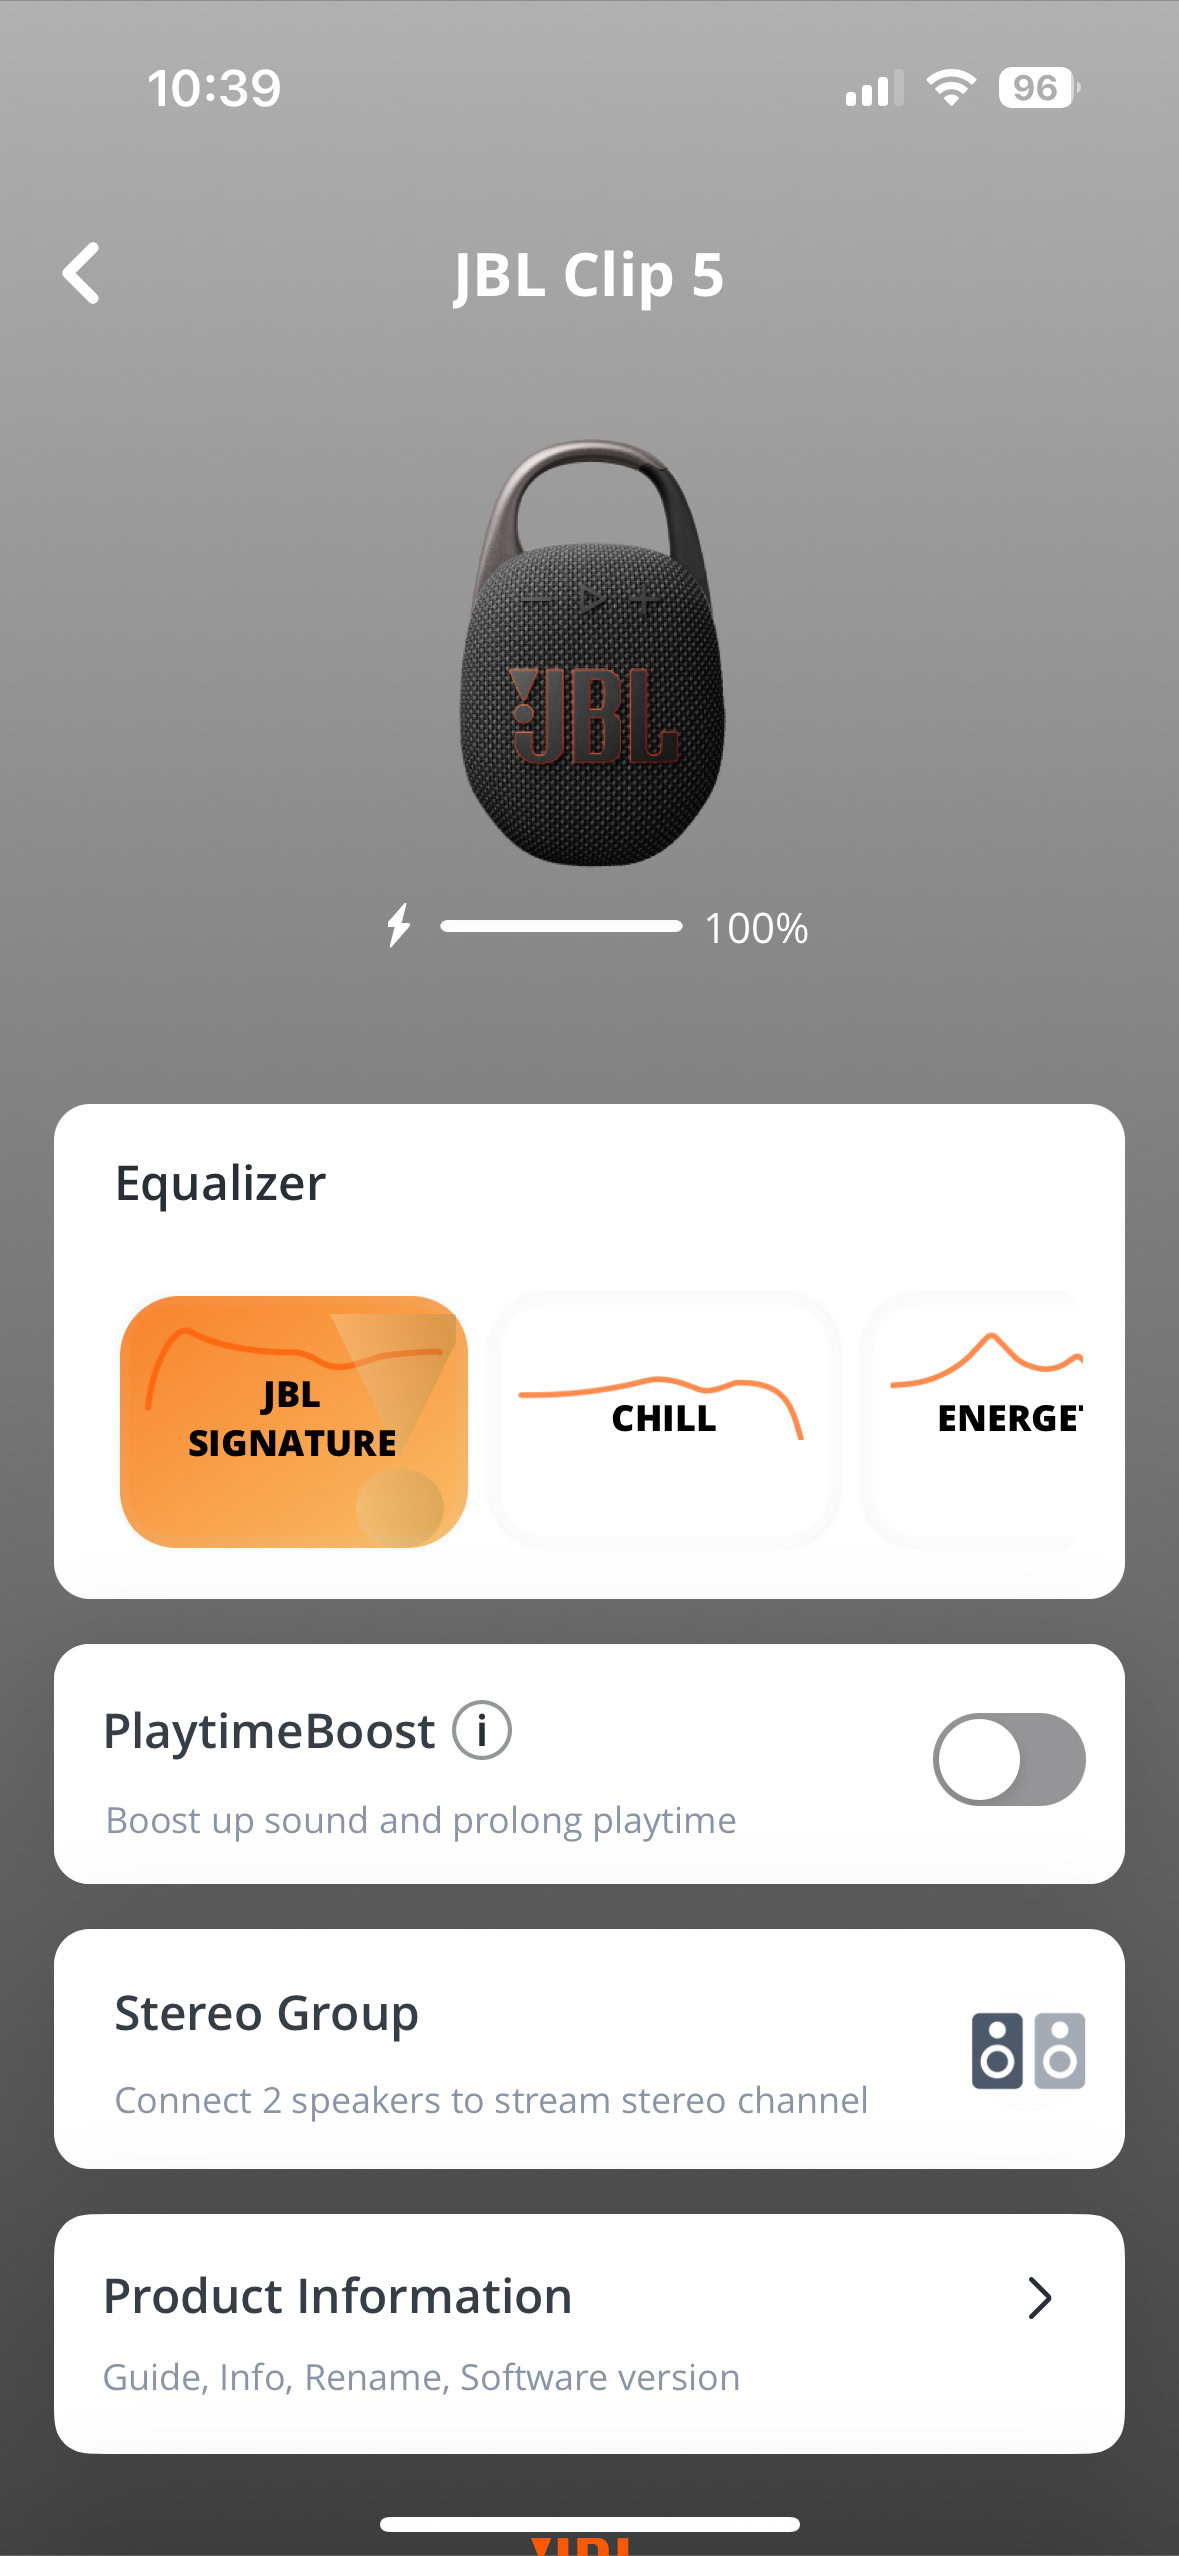 A screen shot of the JBL Portable app, showing various control options while connected to the Clip 5